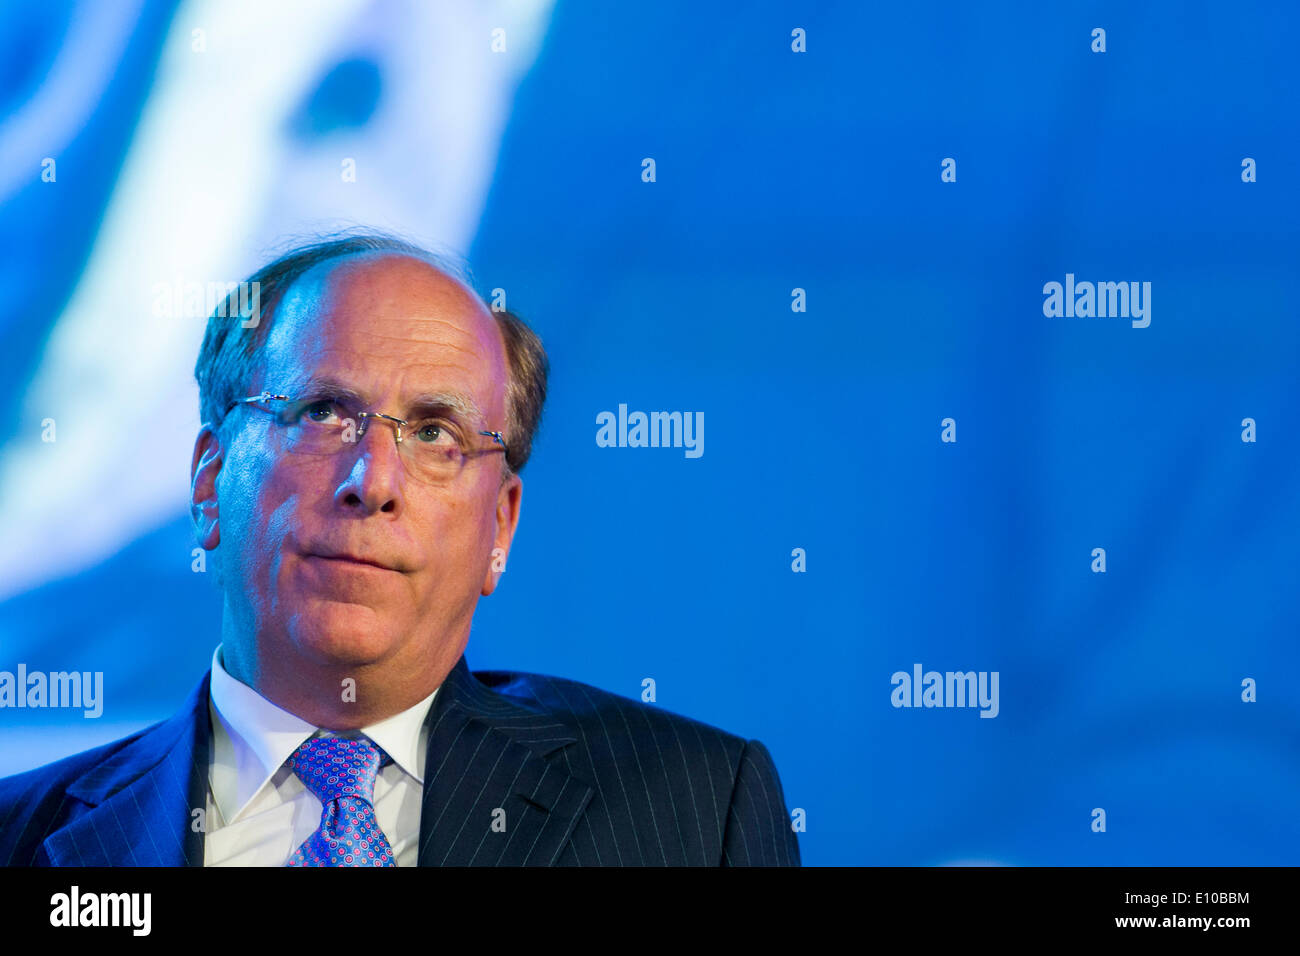 Washington DC, USA. 20th May 2014. Laurence D. Fink, Chairman and CEO of BlackRock, speaks during the General Membership Meeting of the Investment Company Institute in Washington, D.C. on May 20, 2014. Credit:  Kristoffer Tripplaar/Alamy Live News Stock Photo